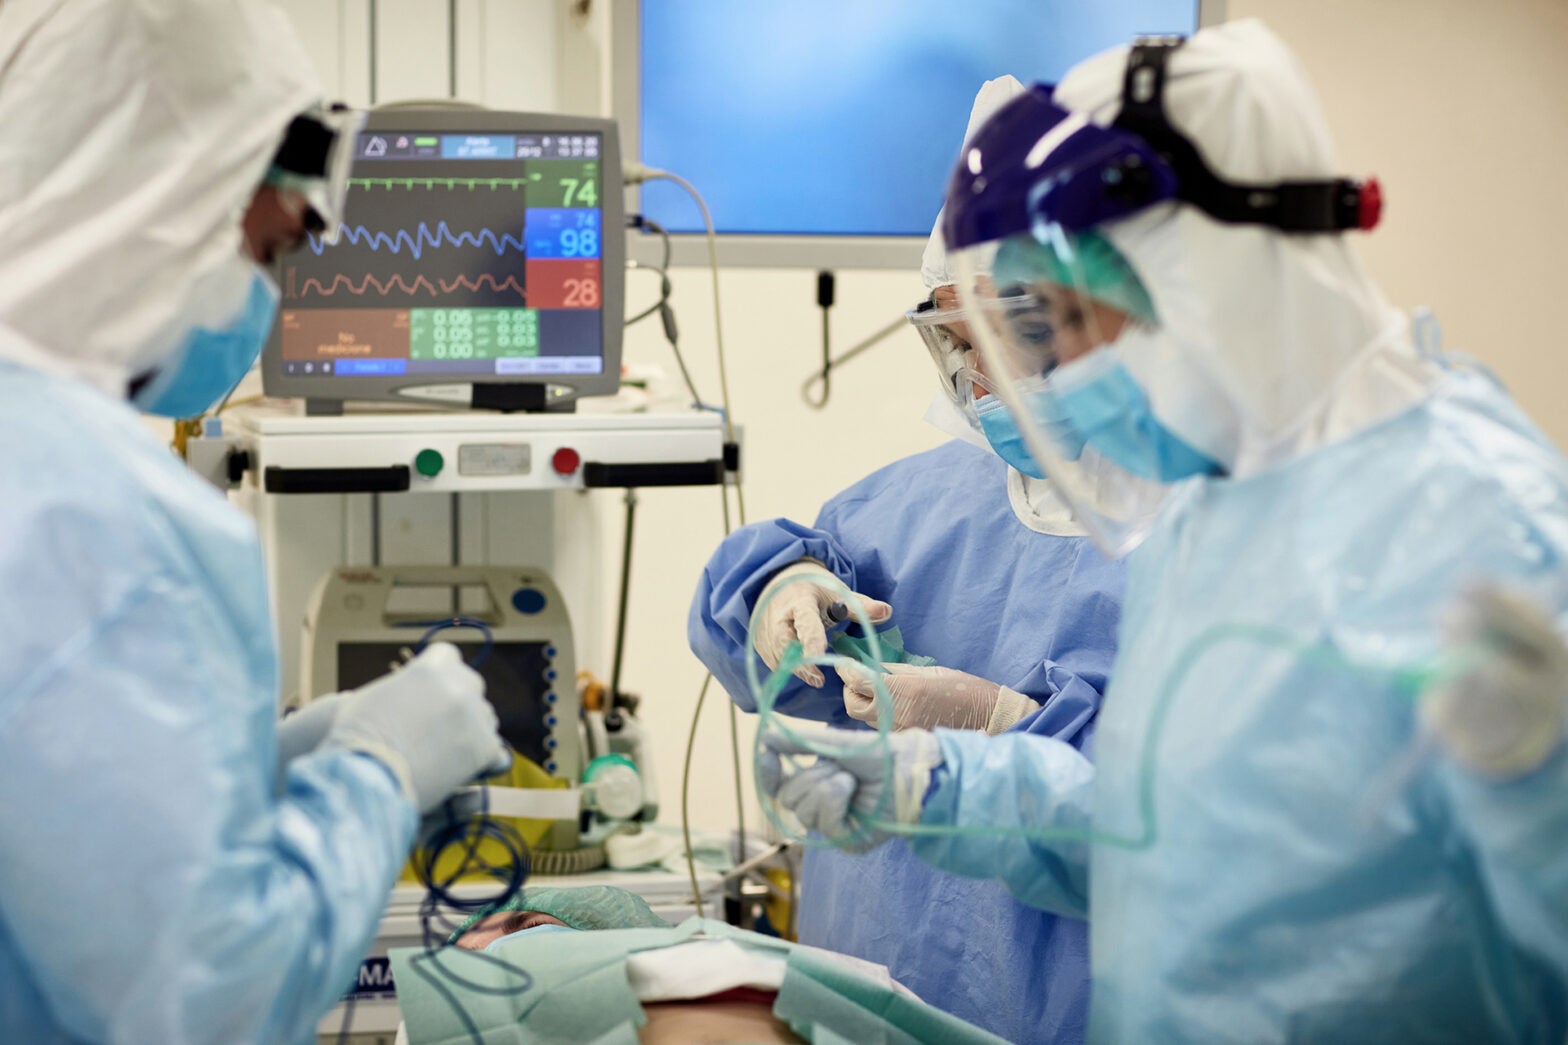 Doctors and nurses wearing surgical gowns over protective suits, eyewear, face shields, and masks as they prepare for surgical procedure.